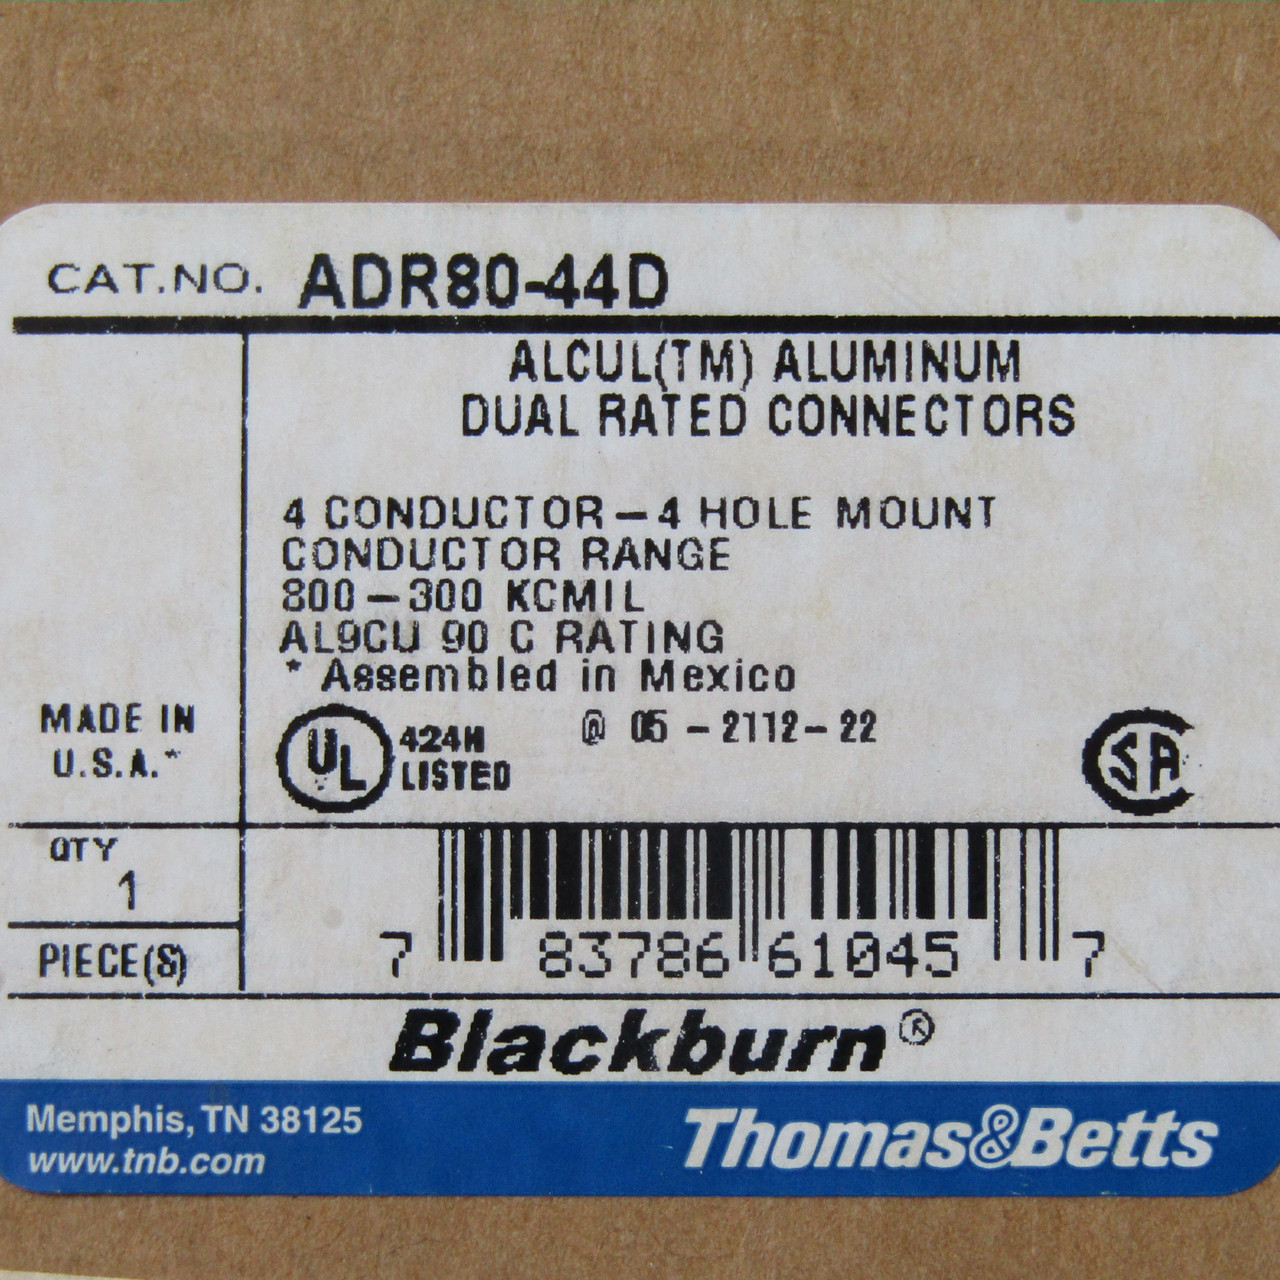 Thomas & Betts  ADR80-44D 4 Conductor, 4 Hole Mount, Aluminum, Dual Rated Connector- New